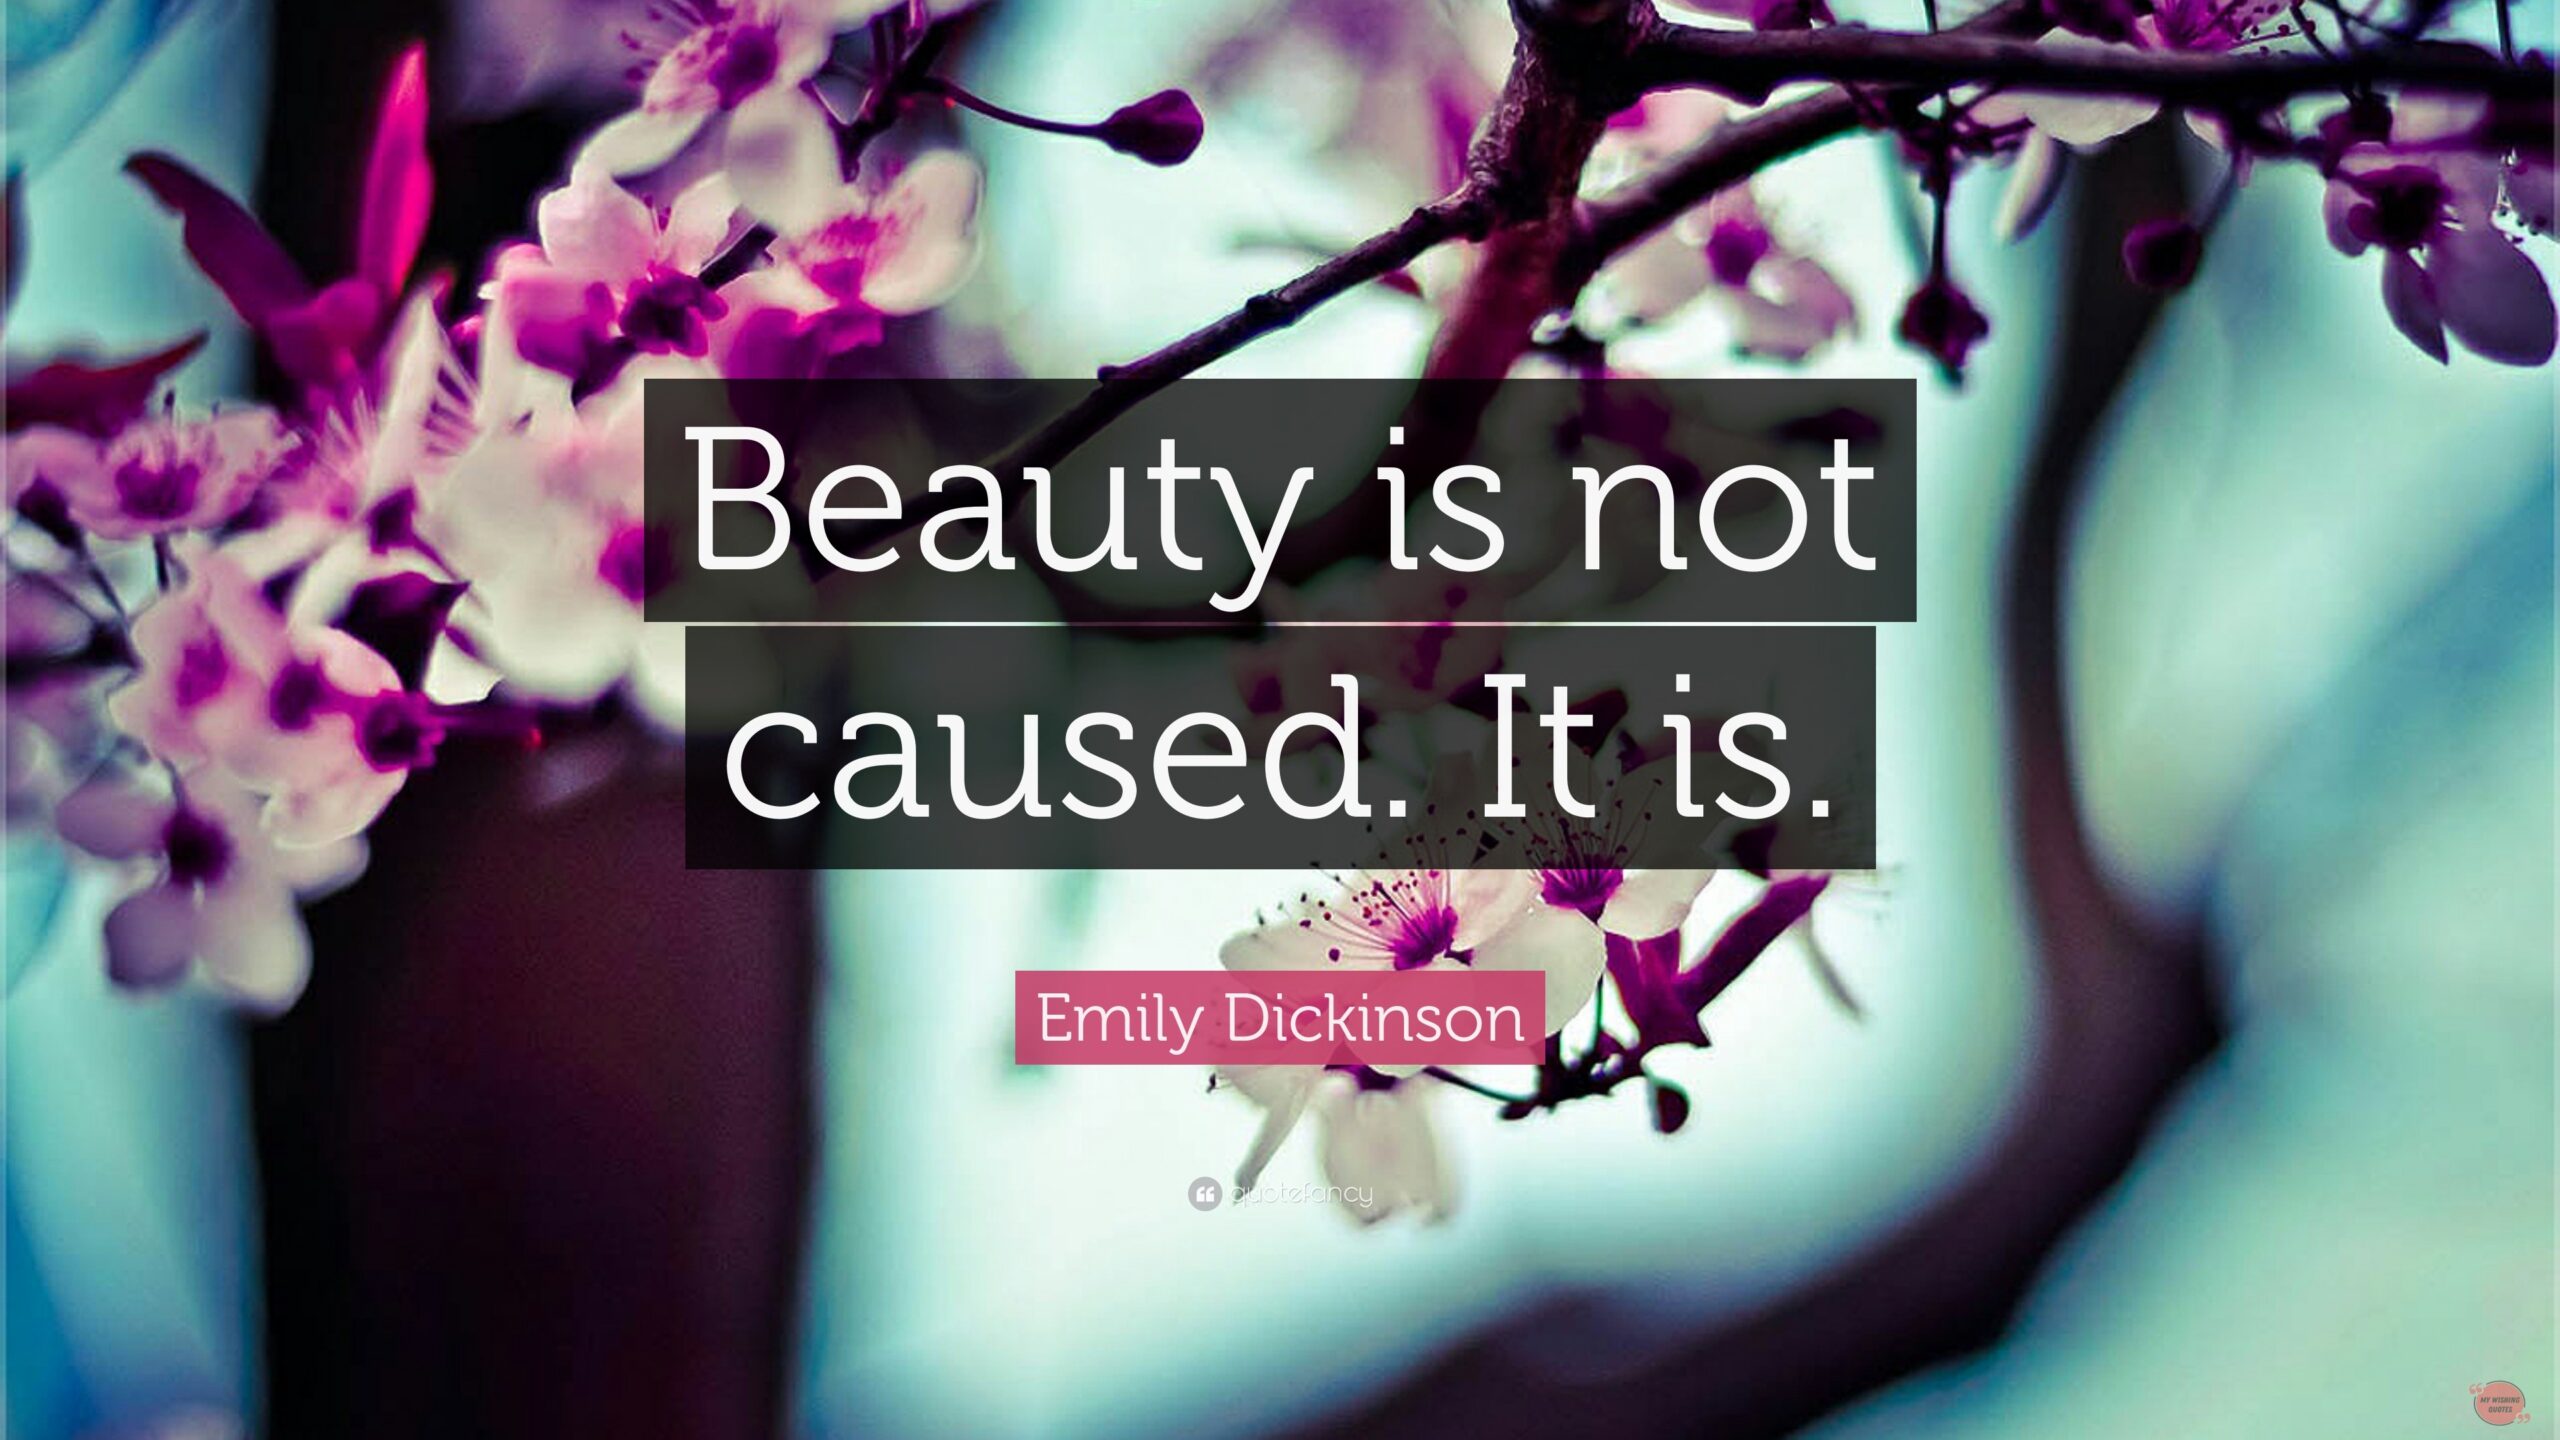 Best Beauty Quotes And Beauty Saying Inspirational Words About Beauty